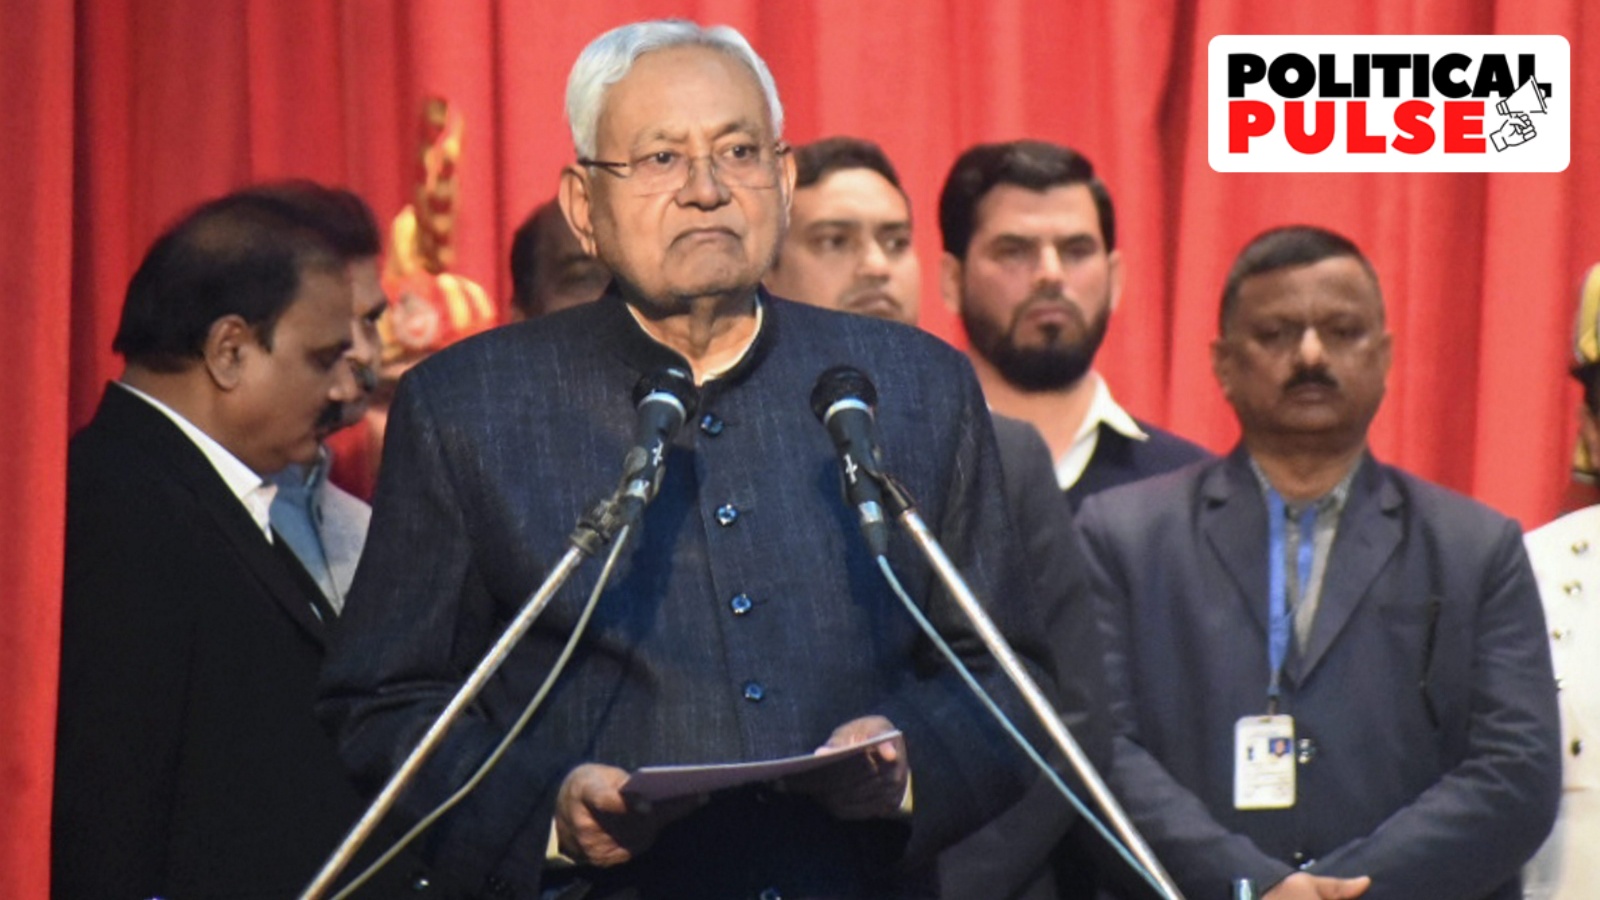 Nitish Kumar sworn in as Bihar CM for the 9th time, along with two deputies from BJP | Political Pulse News